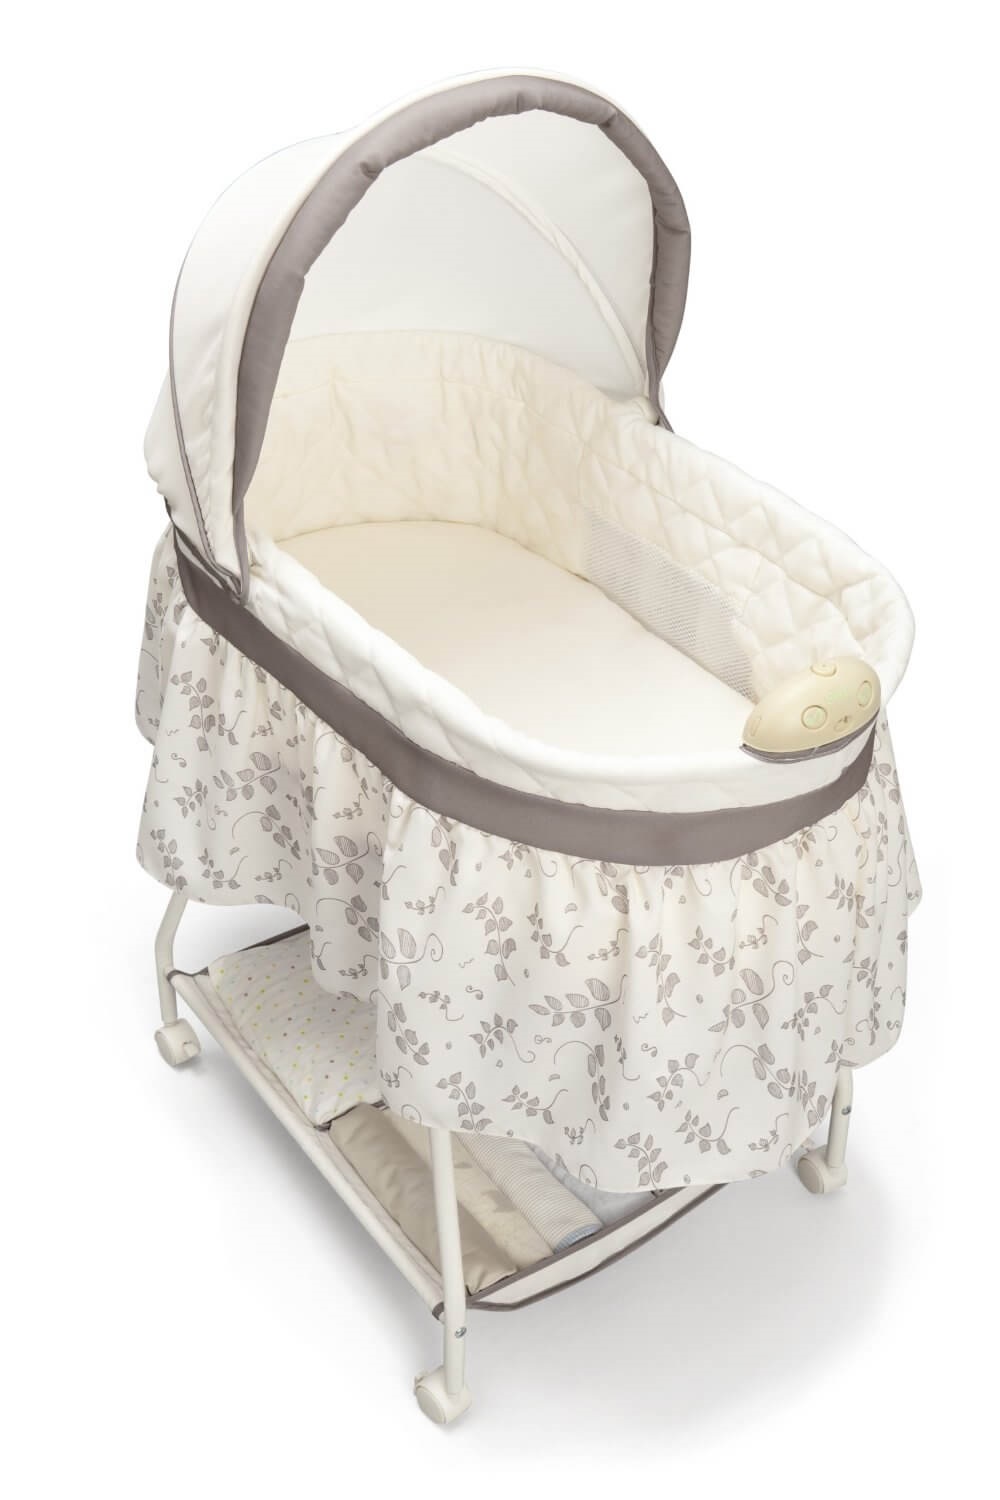 sids approved bassinet